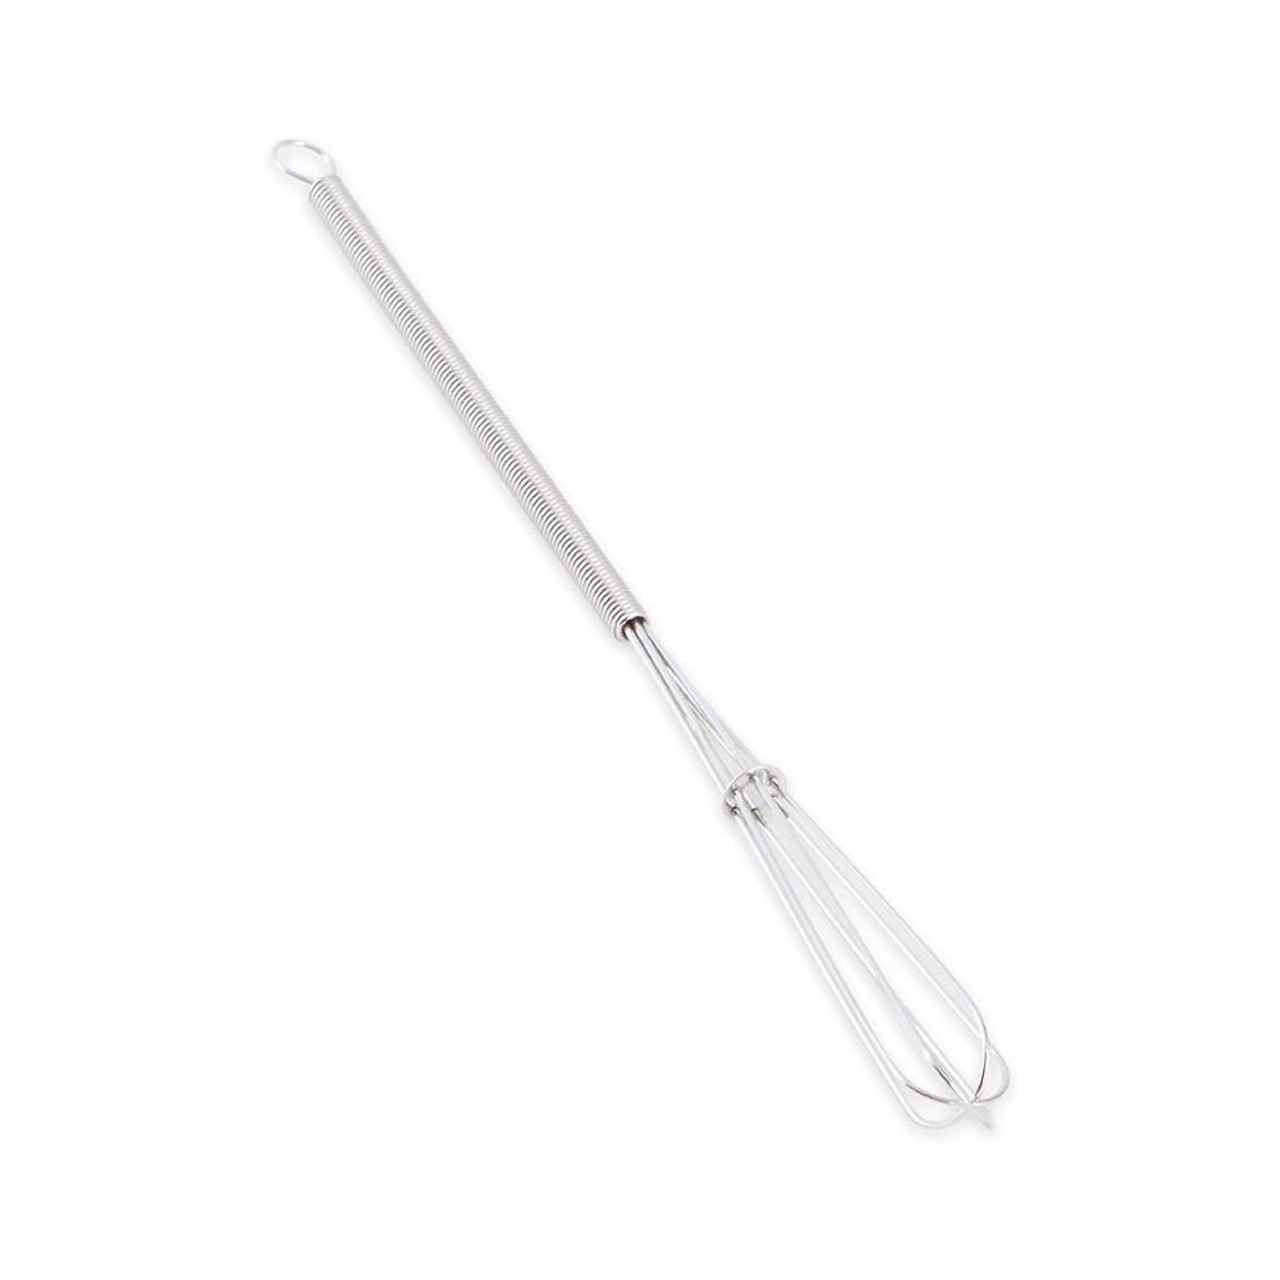 https://cdn11.bigcommerce.com/s-p82jn6co/images/stencil/1280x1280/products/17706/36924/56704-rsvp-mini-whisk-stainless-steel-9-in__58864.1687539182.jpg?c=2